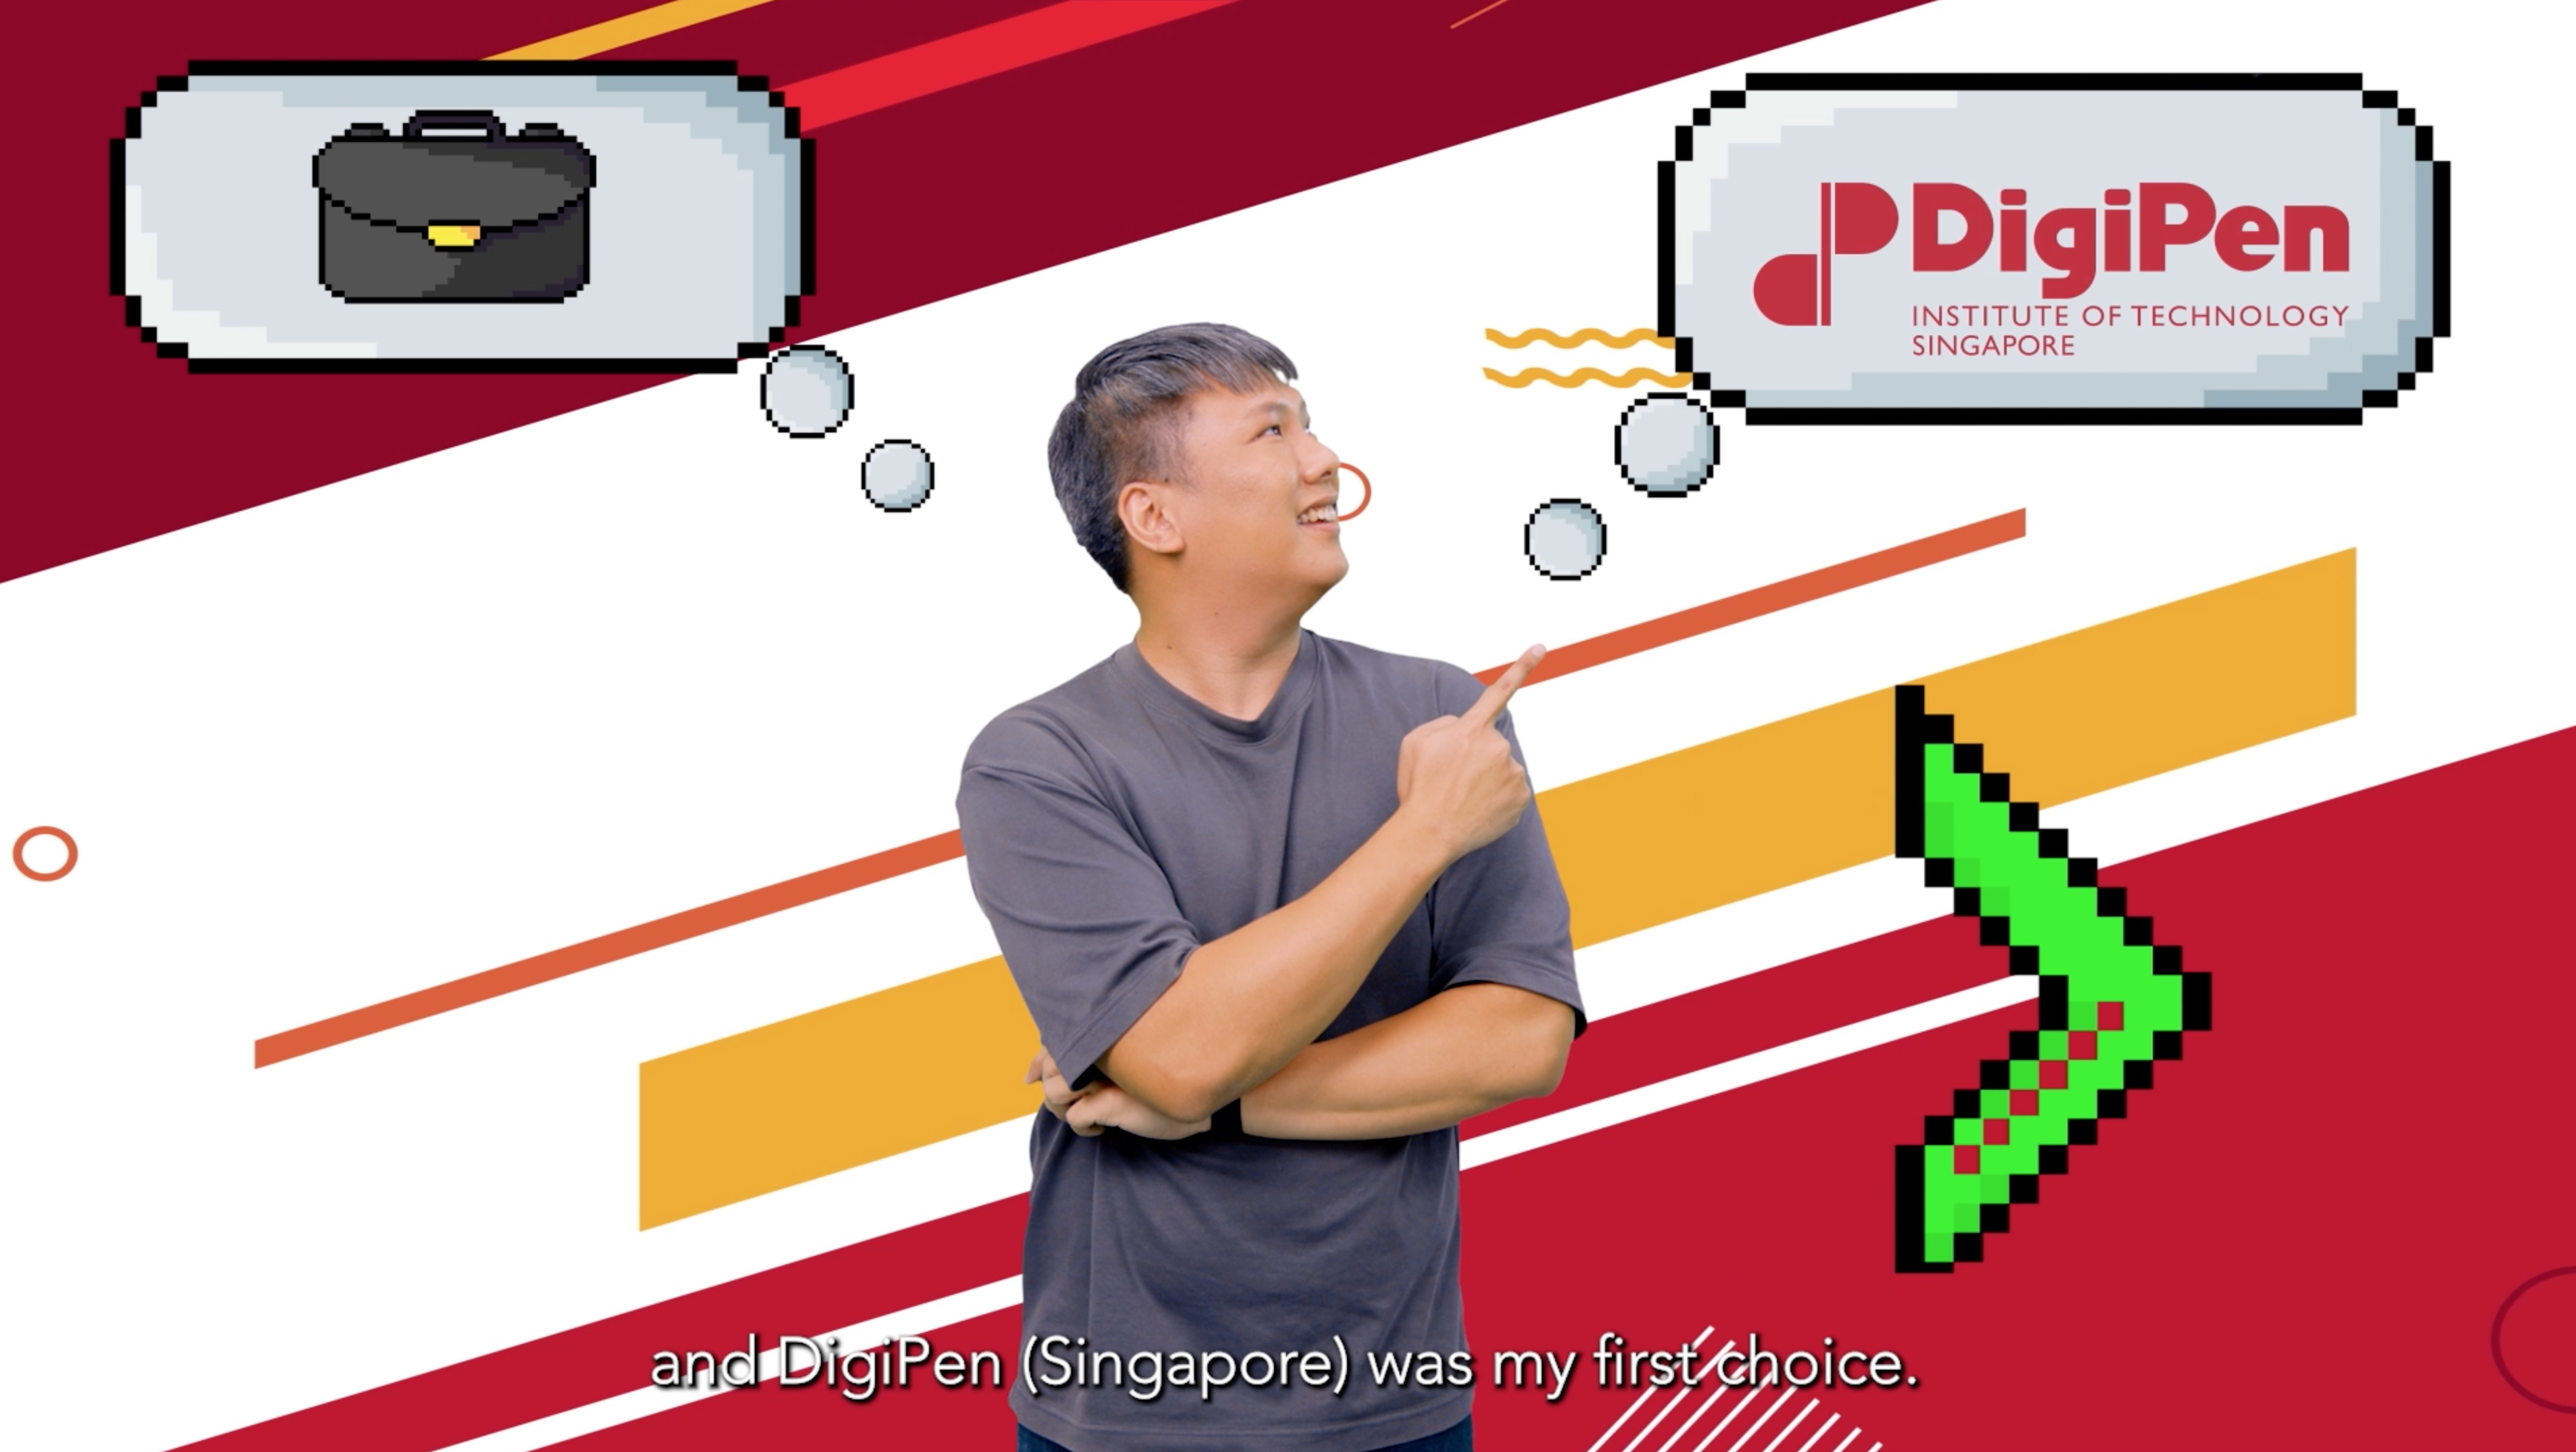 Chan Ka June pointing to a graphic with the DigiPen (Singapore) logo